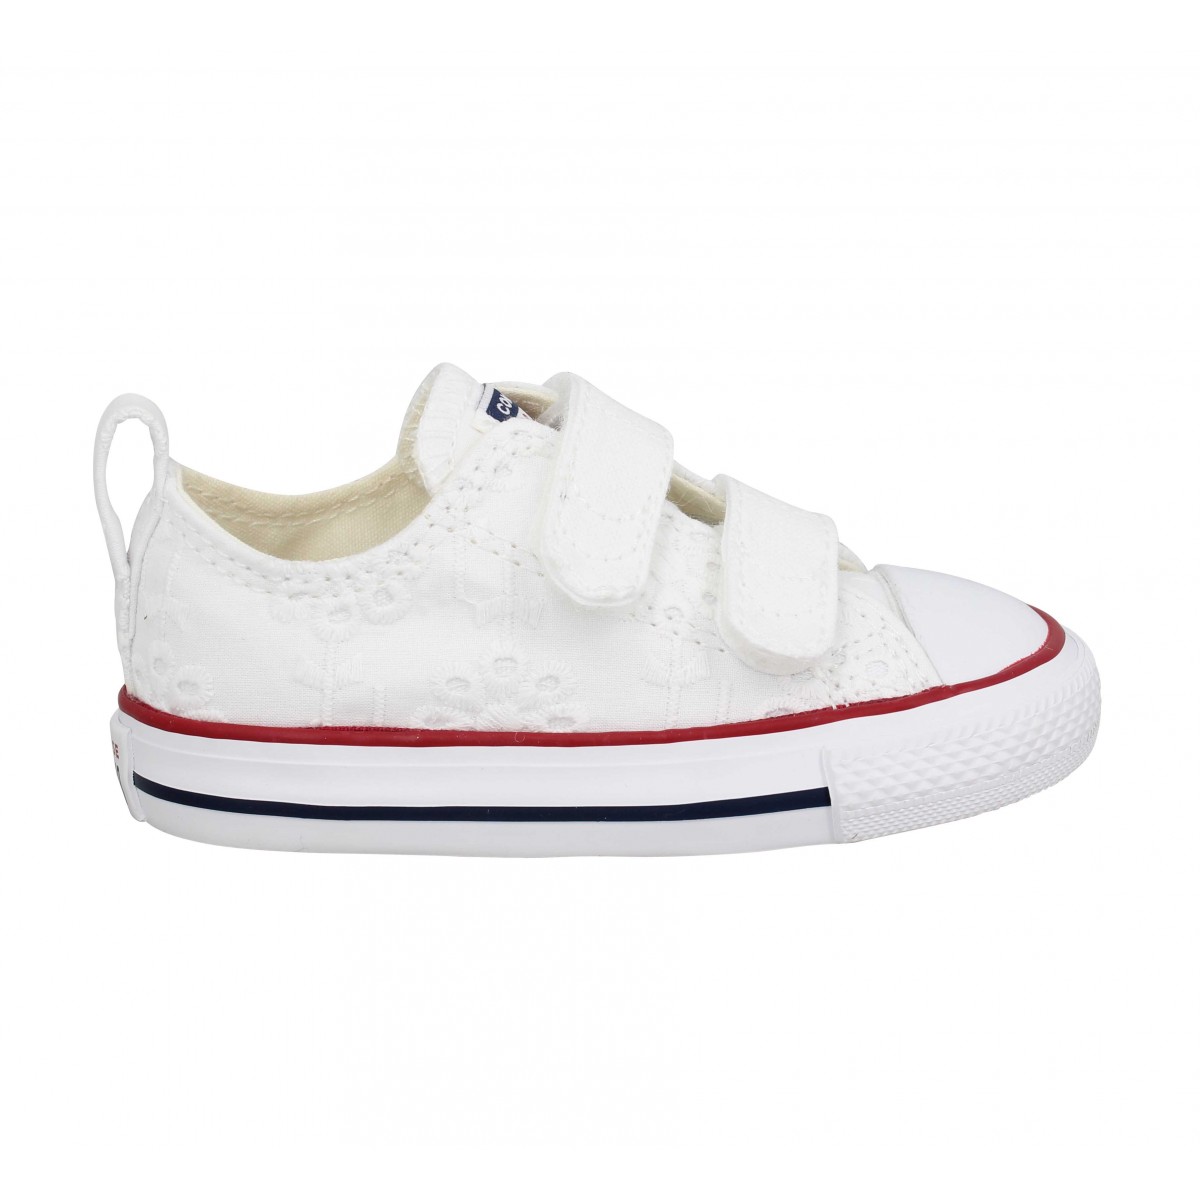 converse blanche bebe taille 19